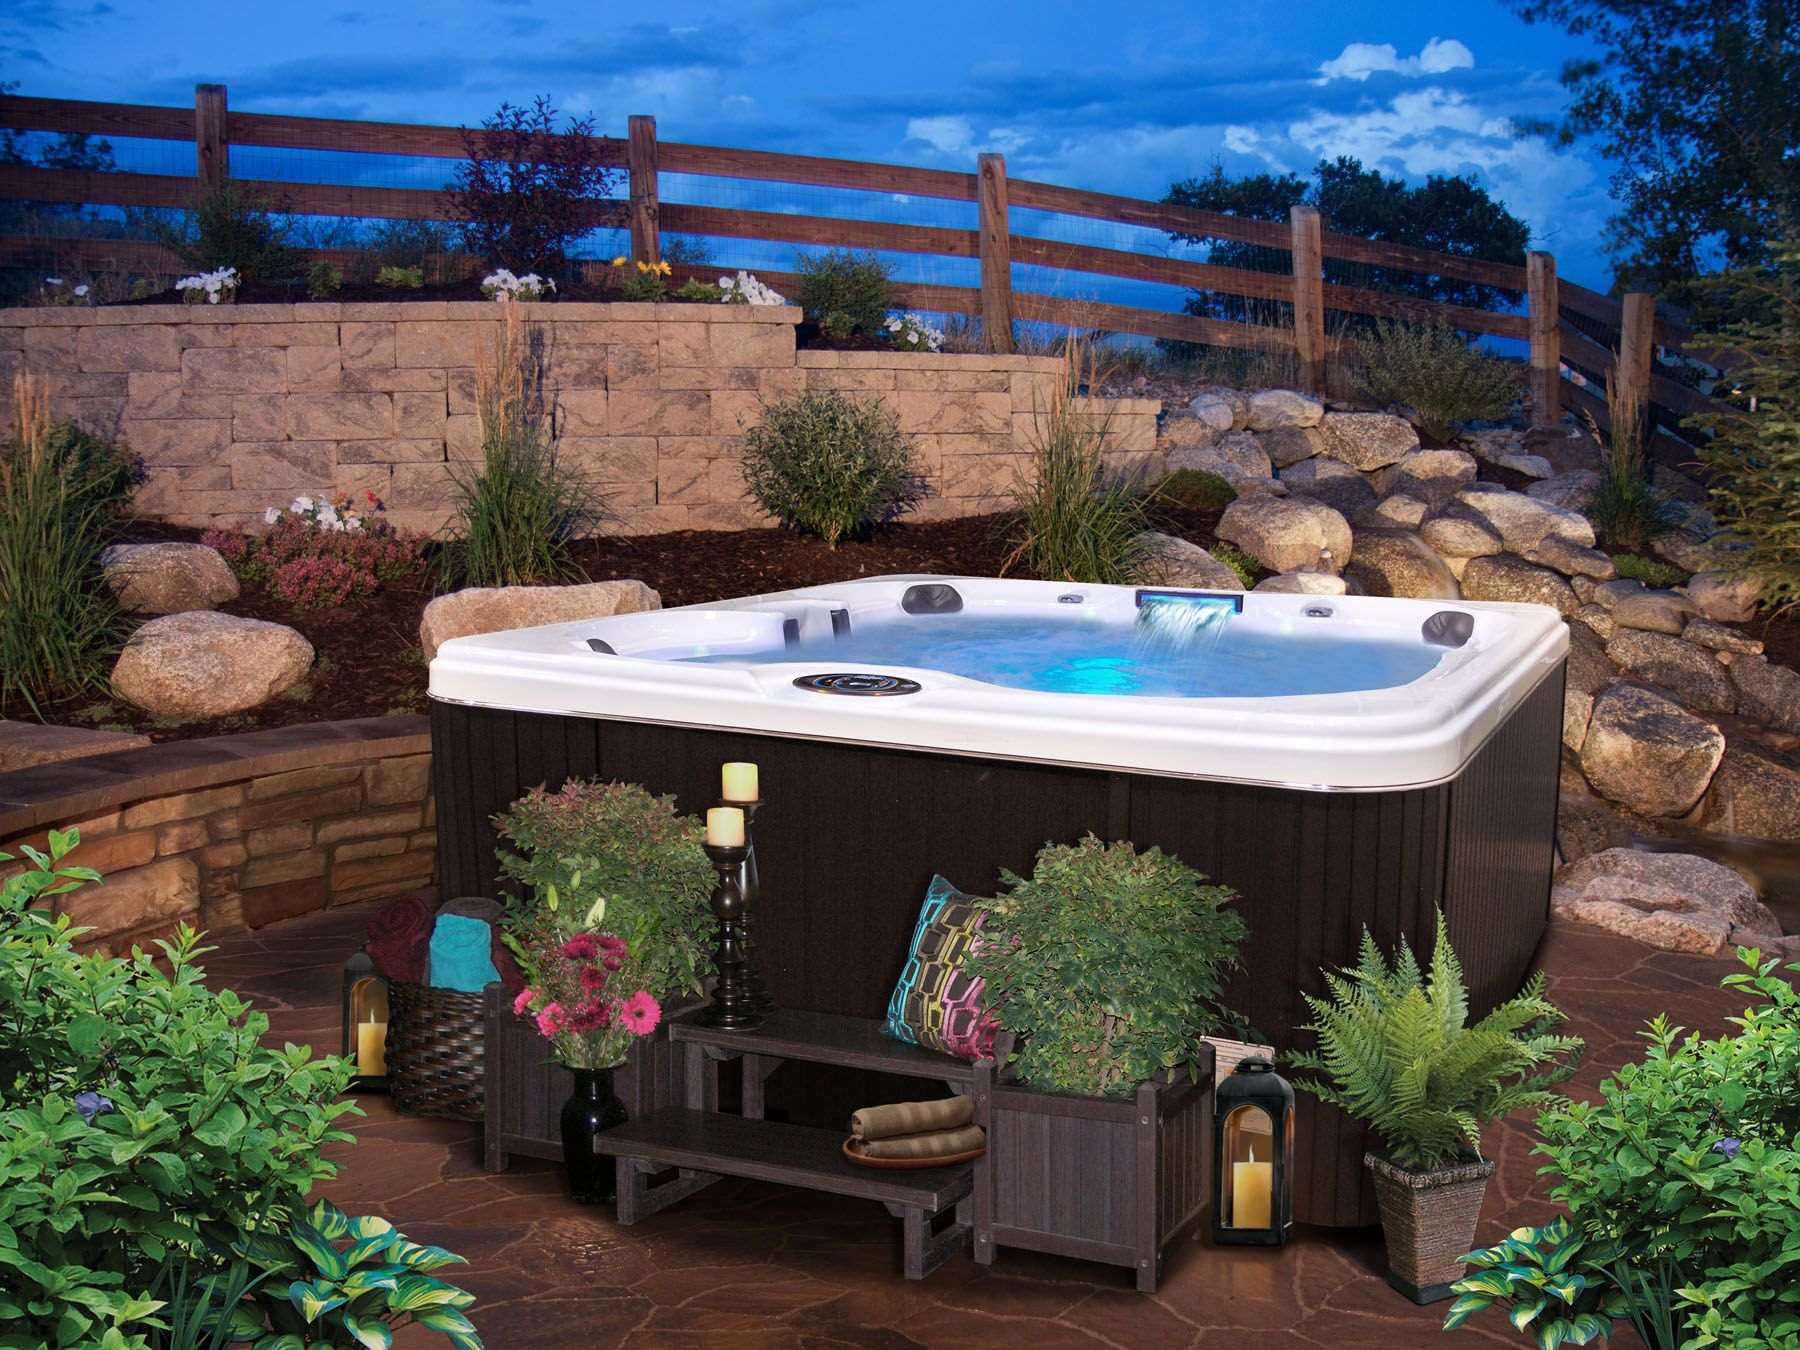 How To Install Hot Tub In Backyard